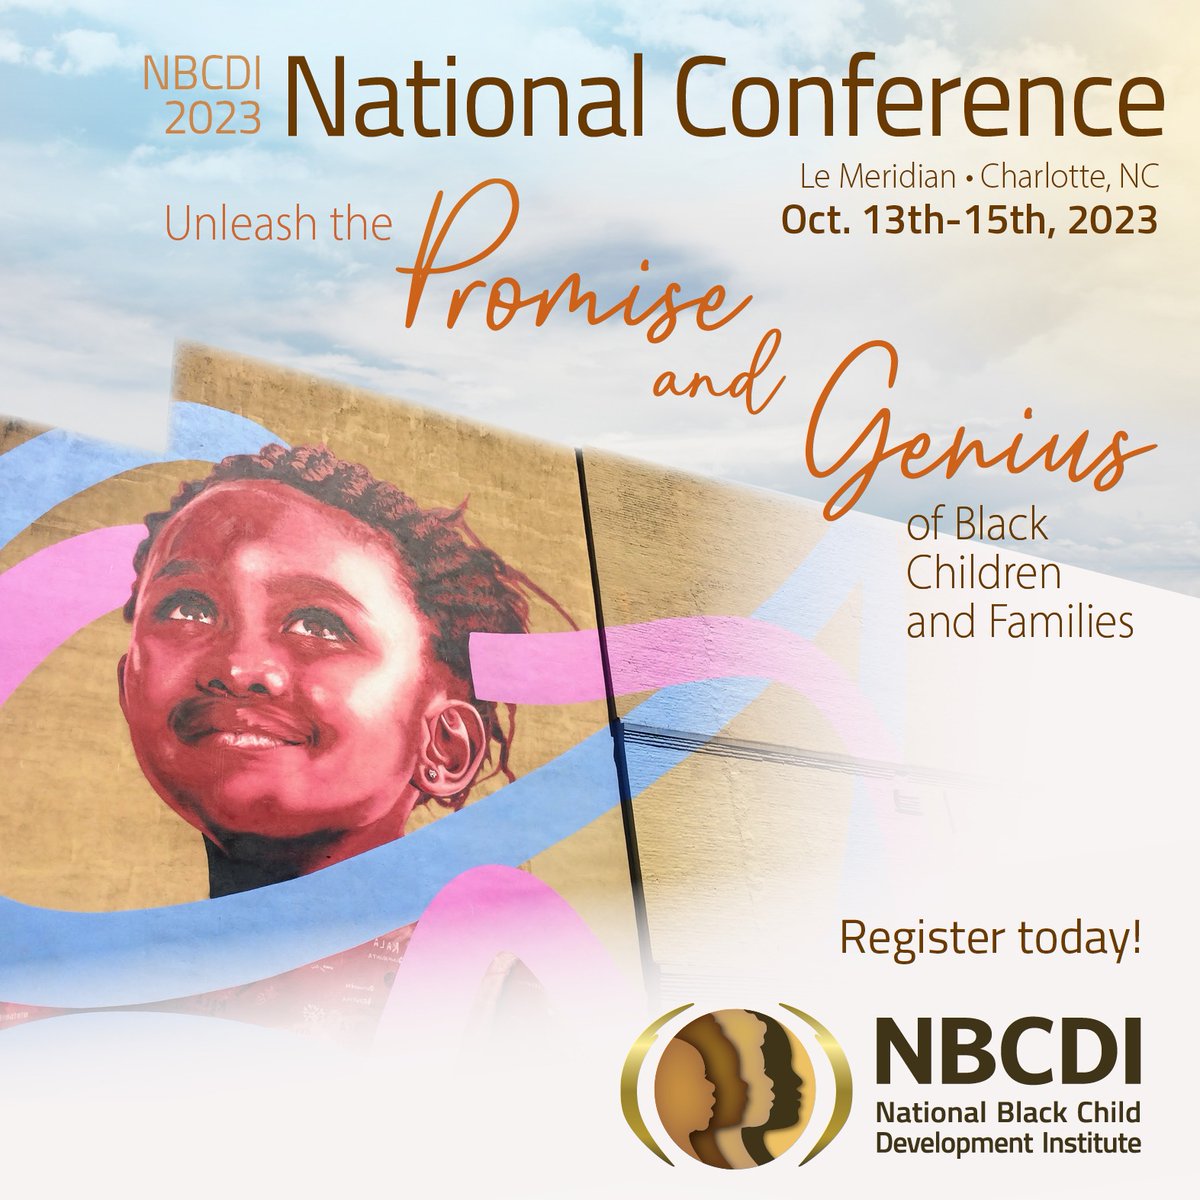 EARLY BIRD Registration is still open!!
Save $100 by registering for NBCDI's 2023 National Conference now. Link in our bio to register today!

@NBCDI 
#UnleashBlackGenius #CelebrateBlackGenius #NBCDI52ndConference #UnapologeticlyBlack #thefutureisBlack #nbcdiconference2023